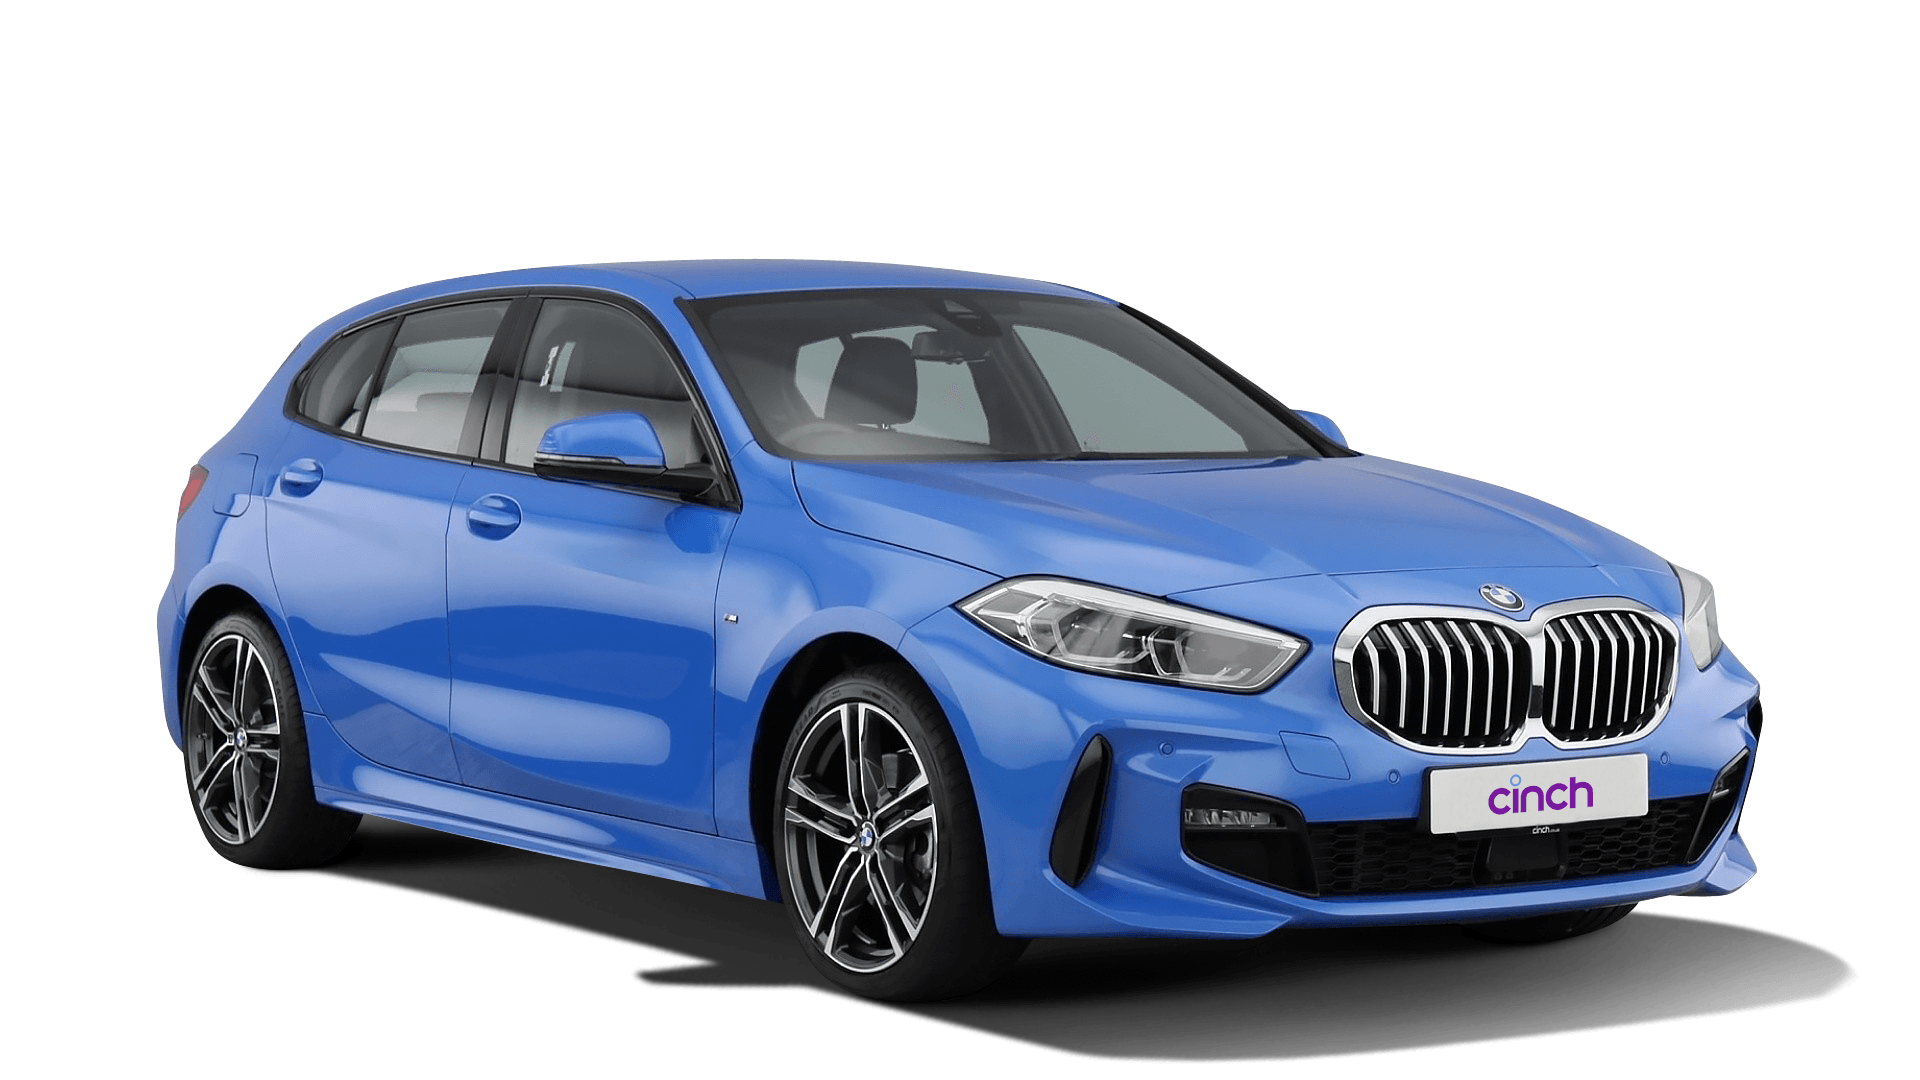 A blue BMW 1 Series facing the right